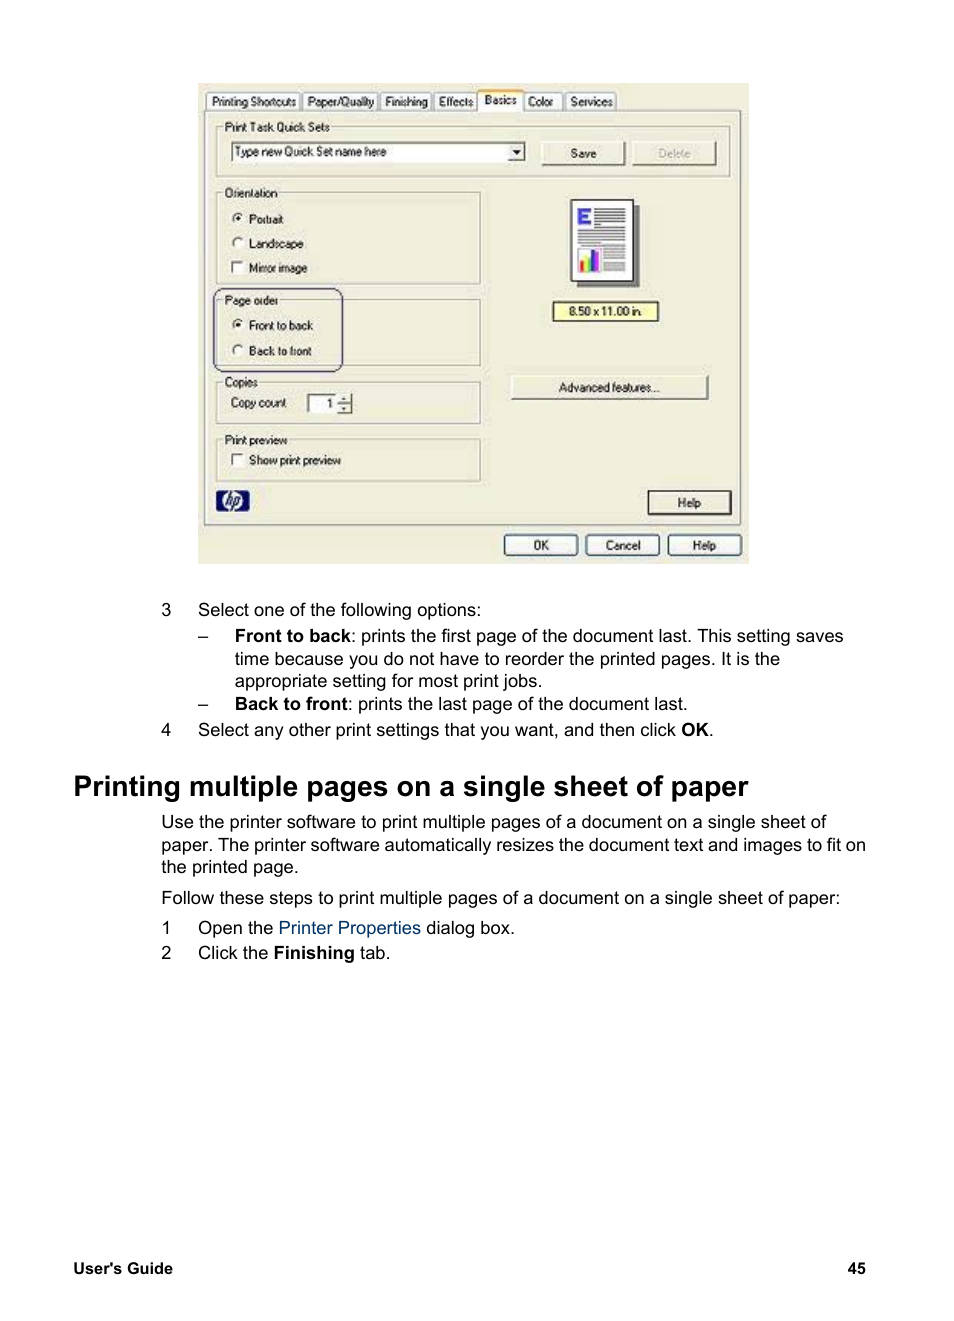 Printing multiple pages on a single sheet of paper | HP Deskjet 5740